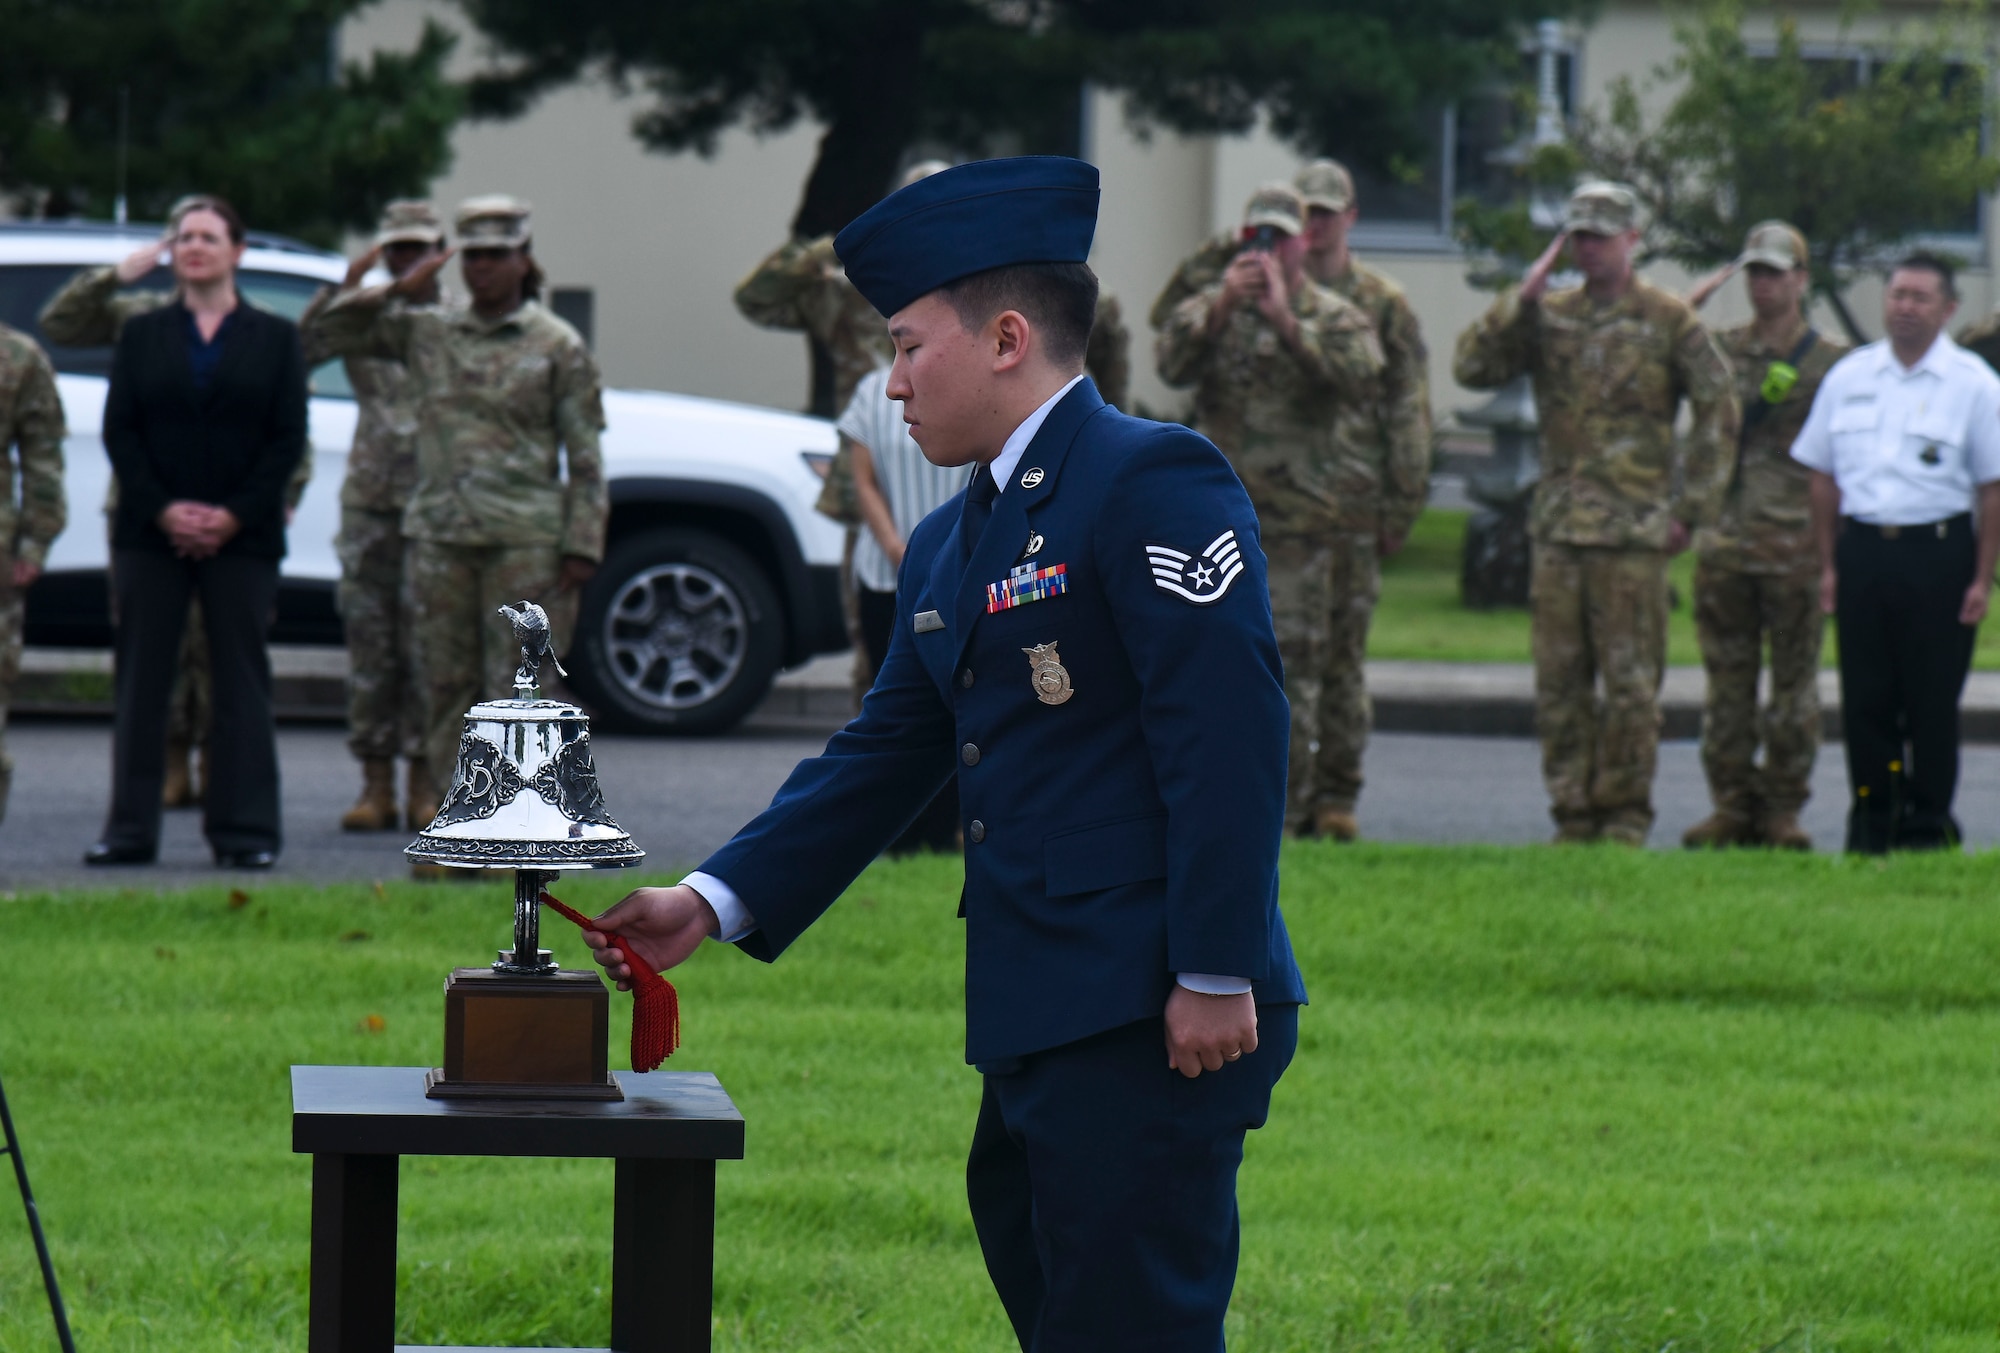 A military member rings a bell.